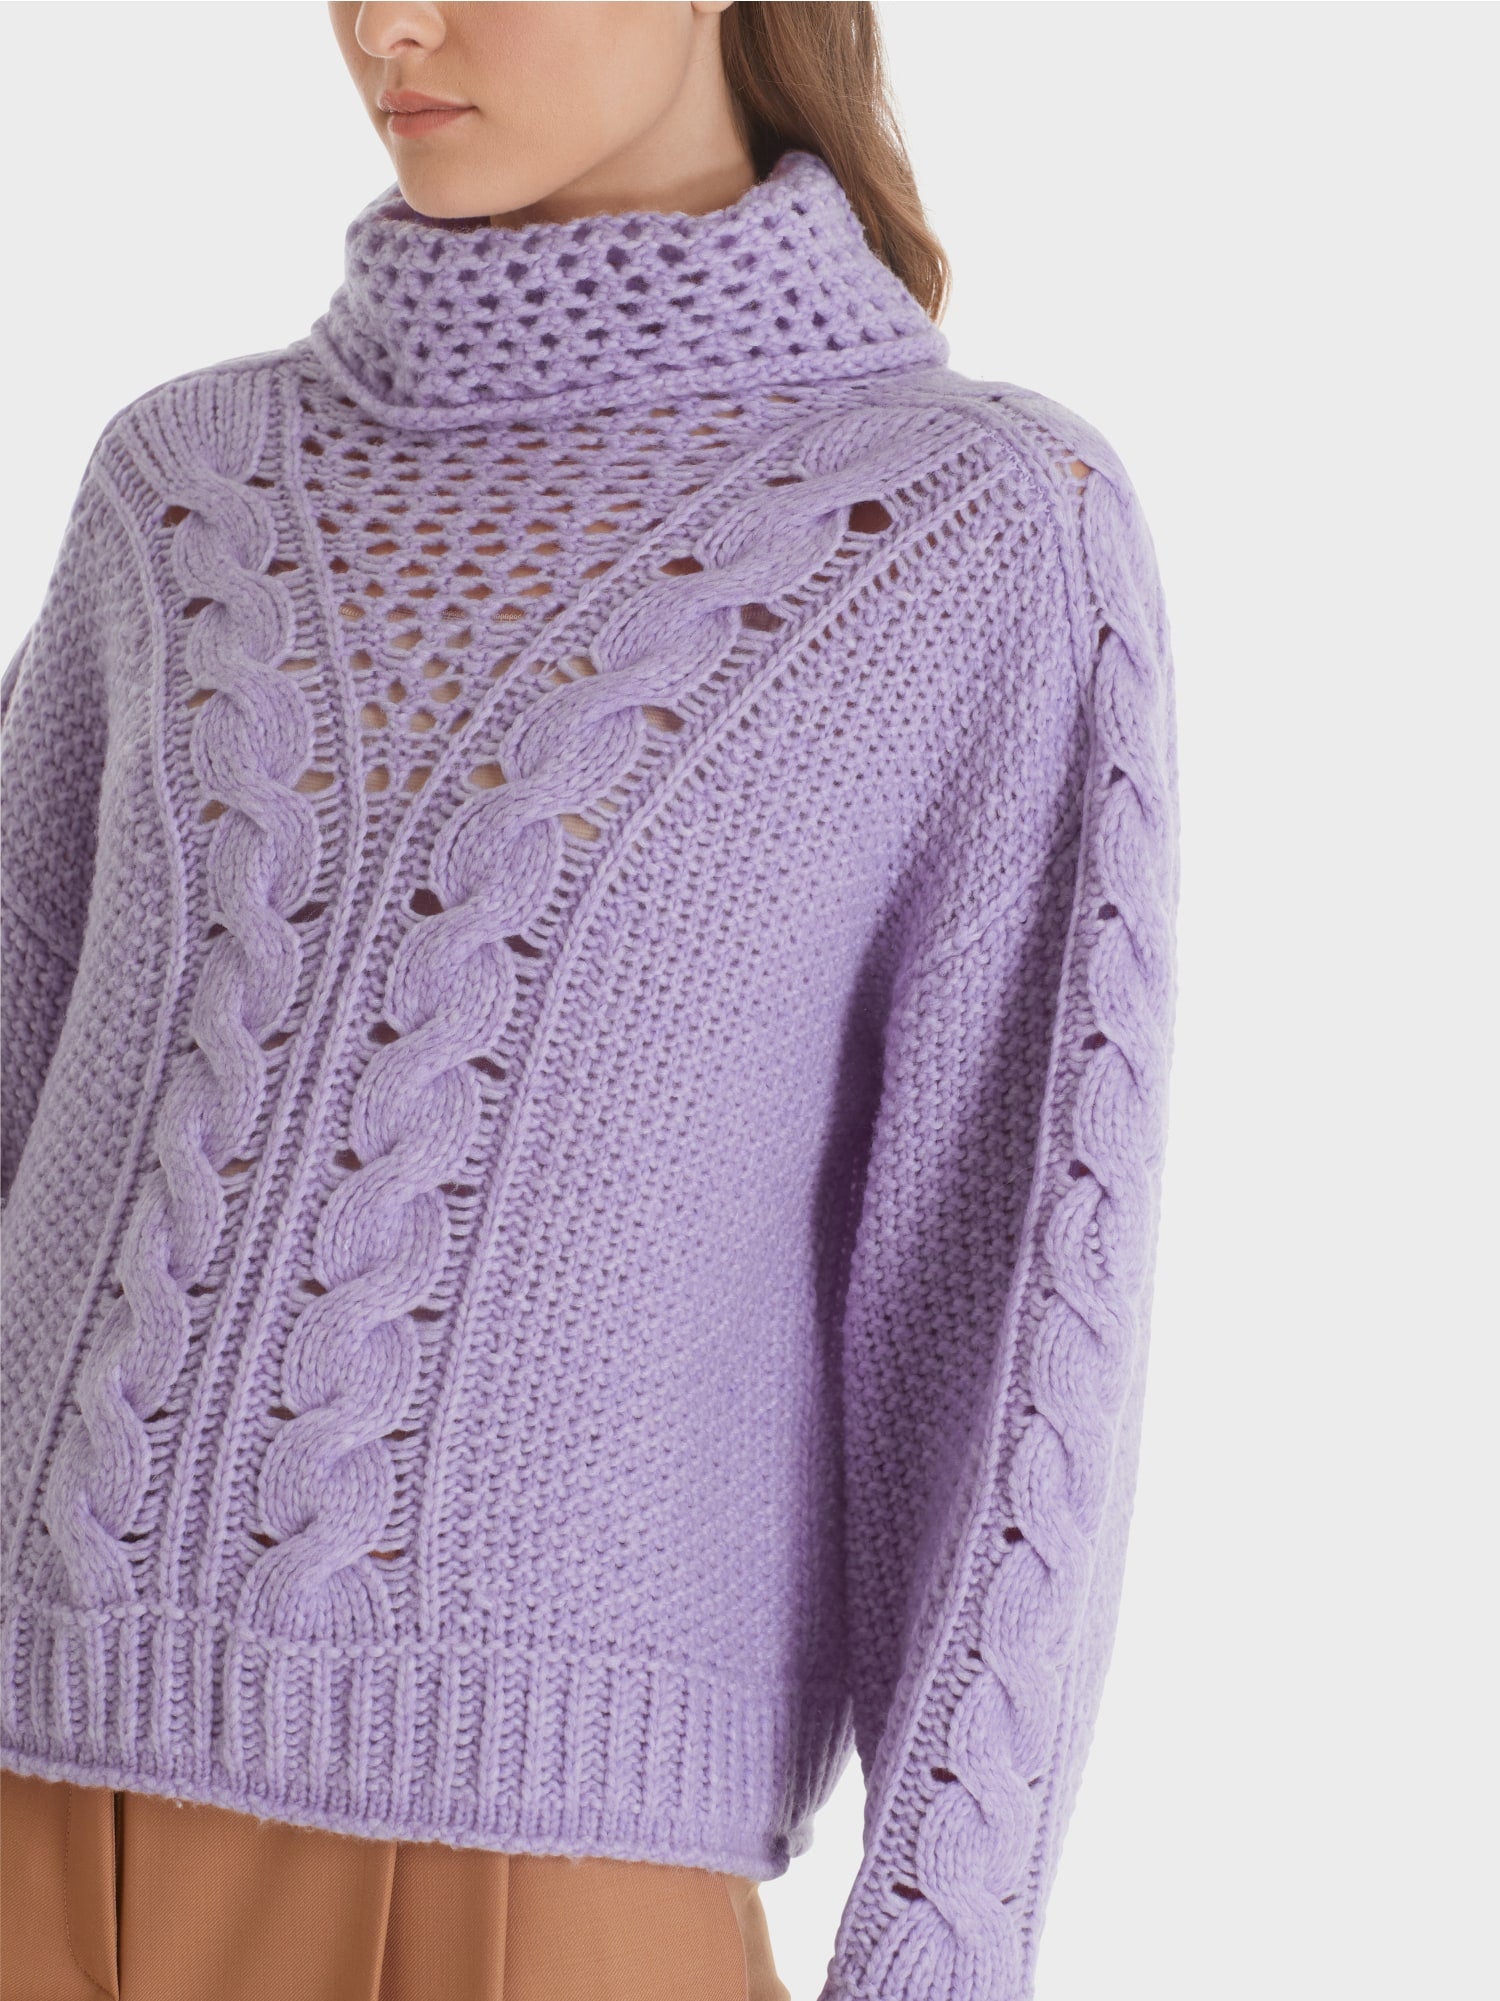 MARC CAIN SWEATER " KNITTED IN GERMANY"